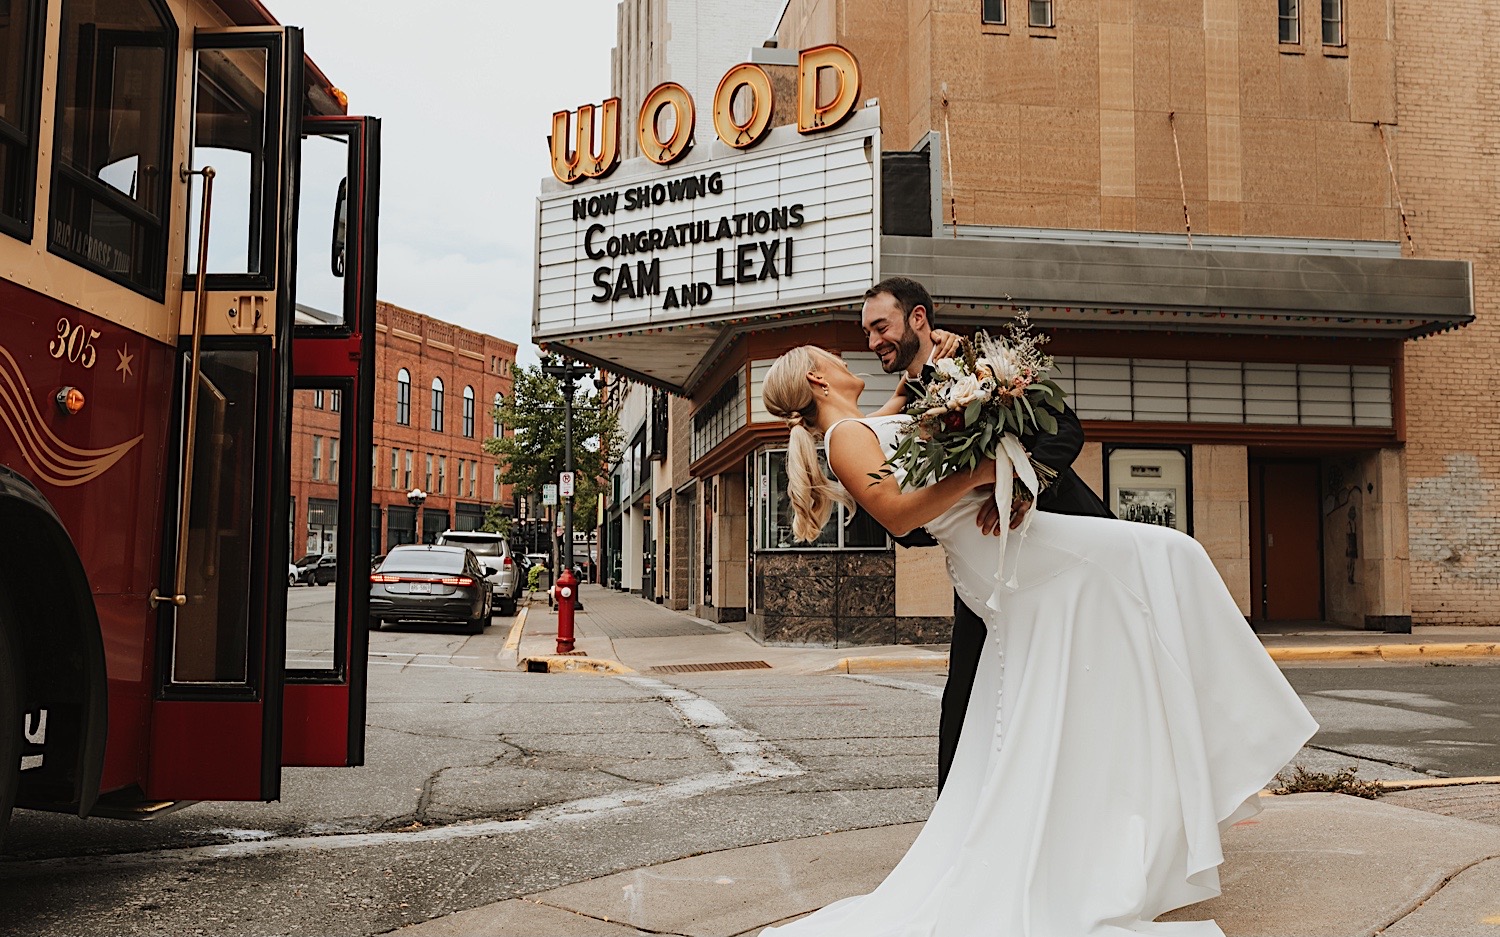 A bride and groom in downtown La Crosse smile as the groom dips the bride, a movie theater is behind them with a sign saying "Now Showing Congratulations Sam and Lexi"